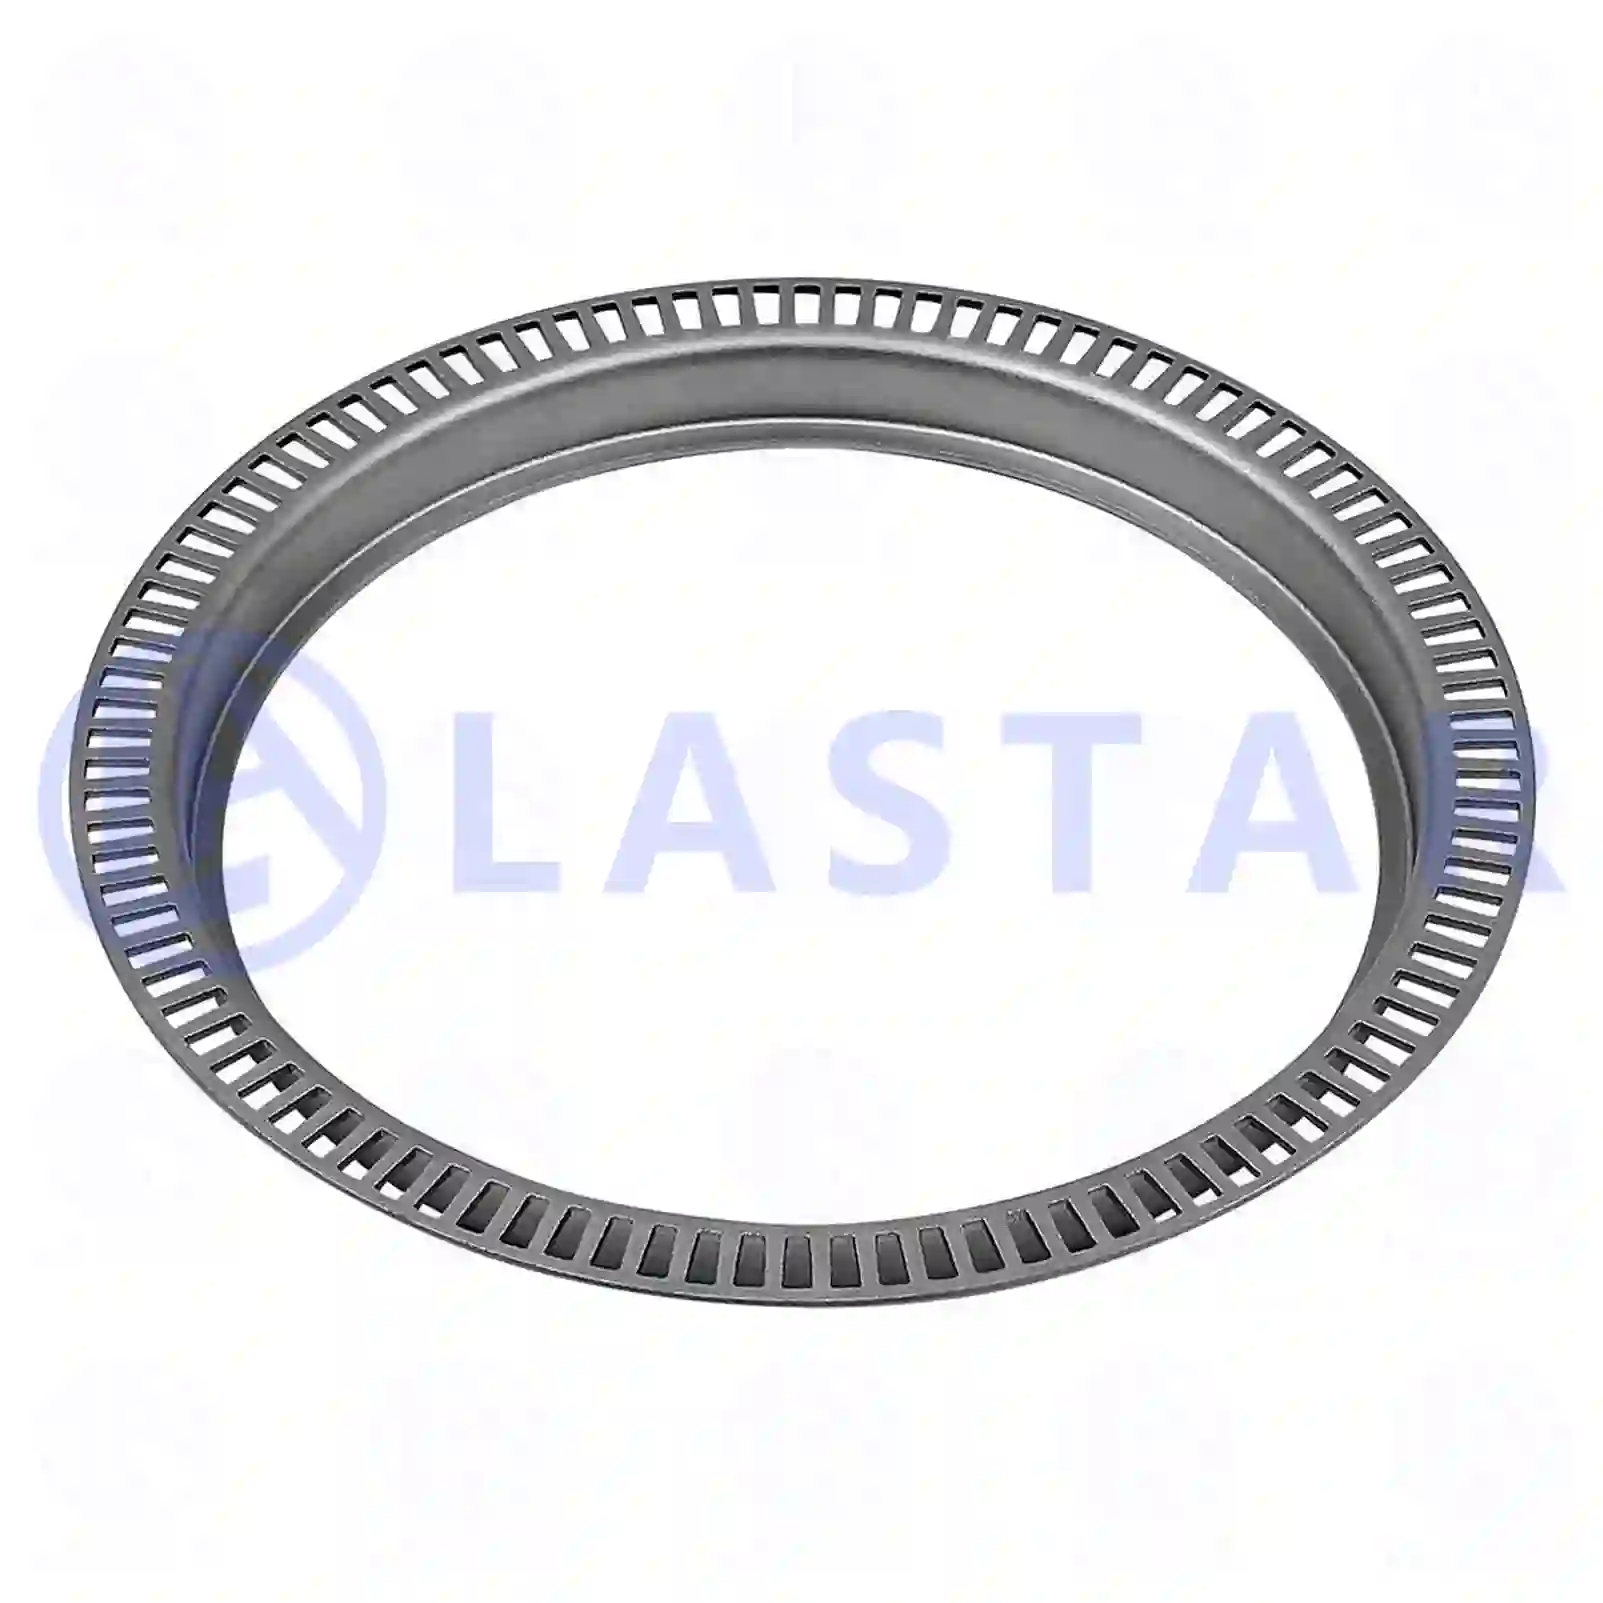 ABS ring, 77726234, 1657638, 1805824, ZG50021-0008, , ||  77726234 Lastar Spare Part | Truck Spare Parts, Auotomotive Spare Parts ABS ring, 77726234, 1657638, 1805824, ZG50021-0008, , ||  77726234 Lastar Spare Part | Truck Spare Parts, Auotomotive Spare Parts